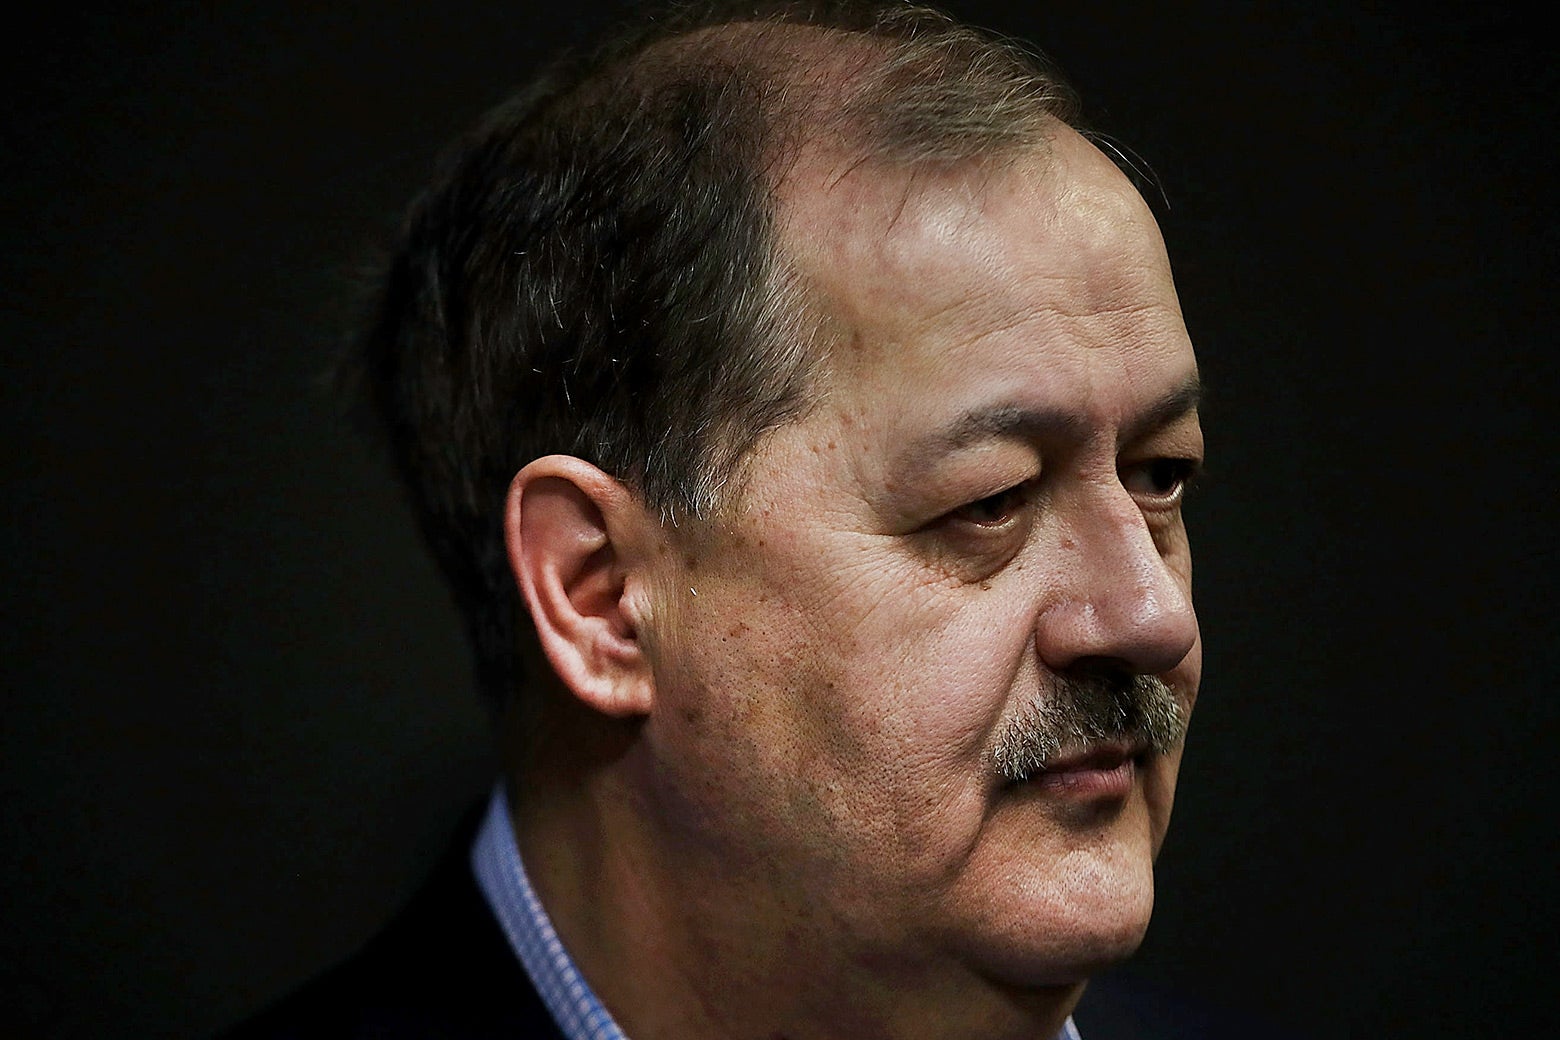 U.S. Senate candidate Don Blankenship speaks at a town hall meeting at West Virginia University on March 1 in Morgantown.